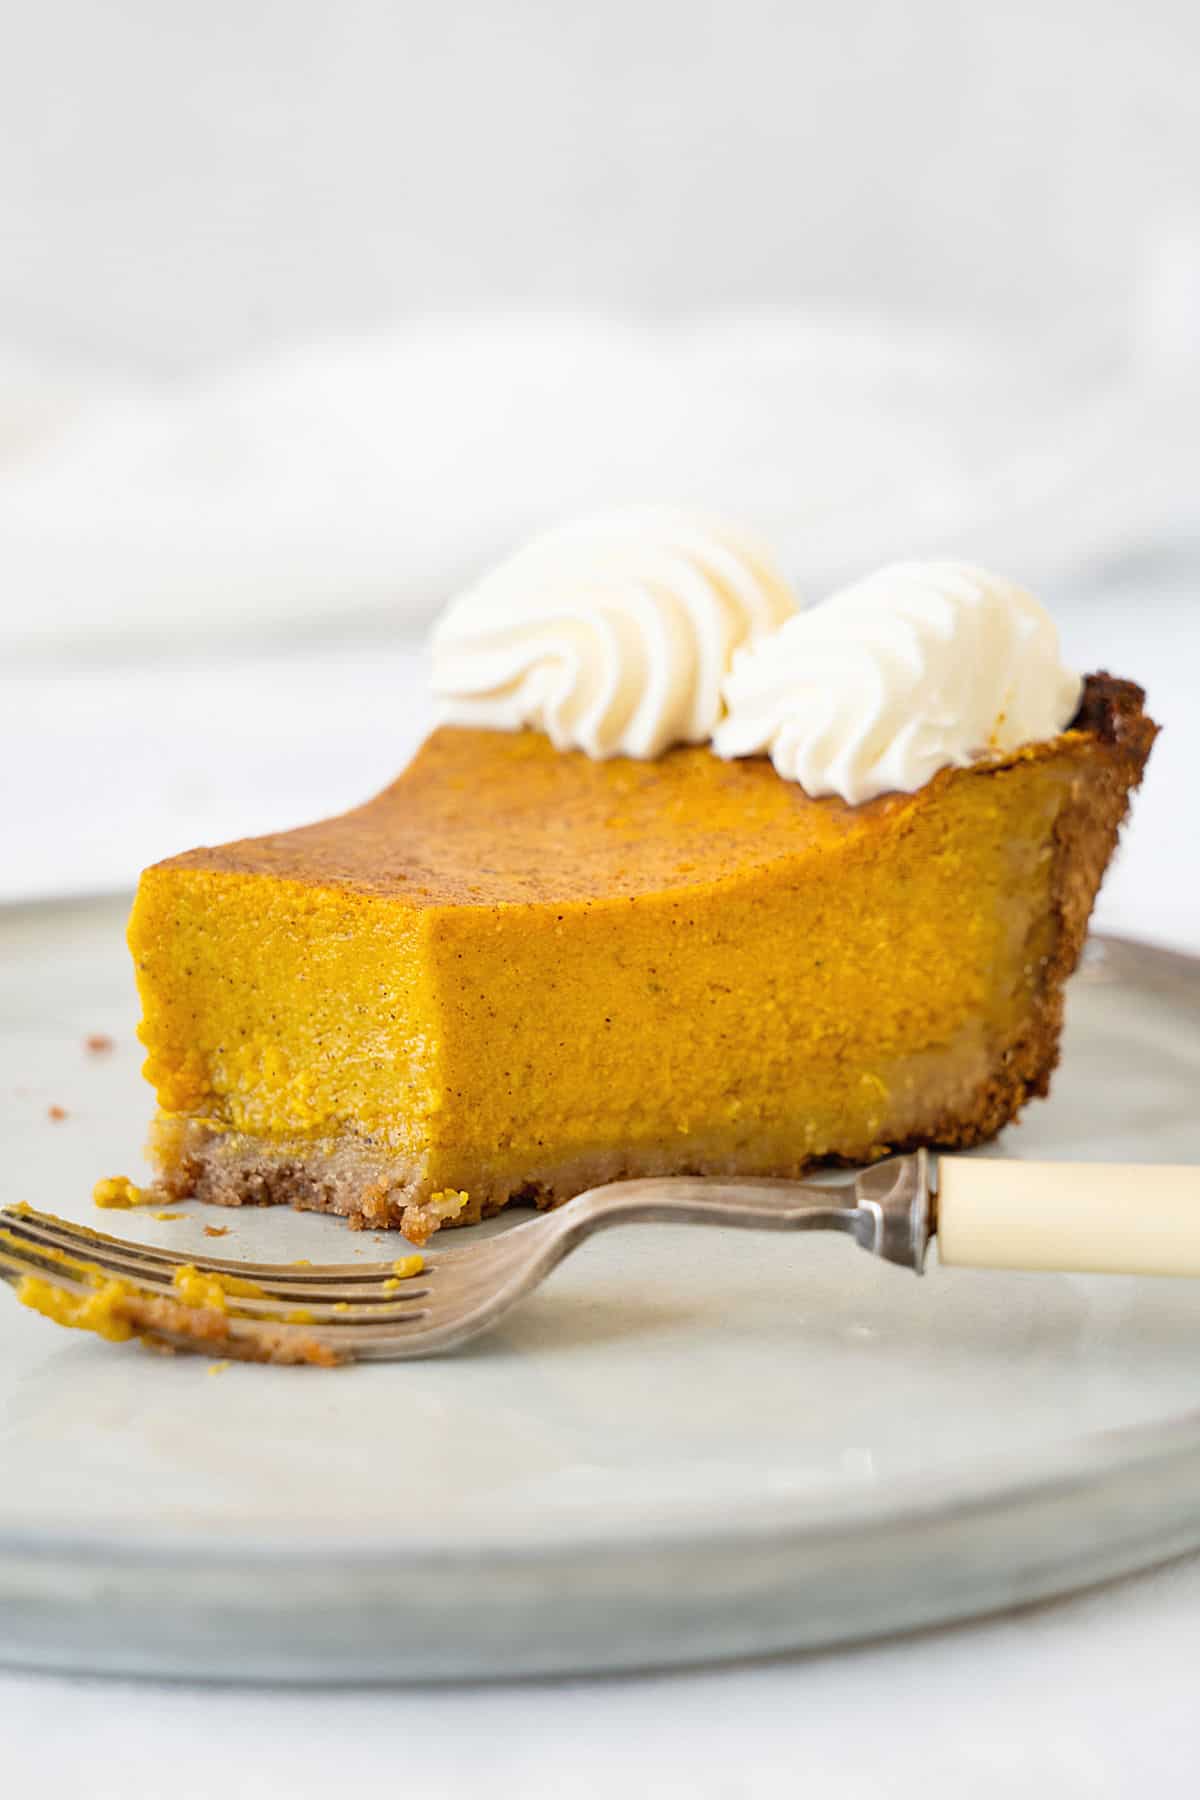 Slice of bitten pumpkin custard pie with whipped cream on a grey plate. A silver fork. Light grey background.